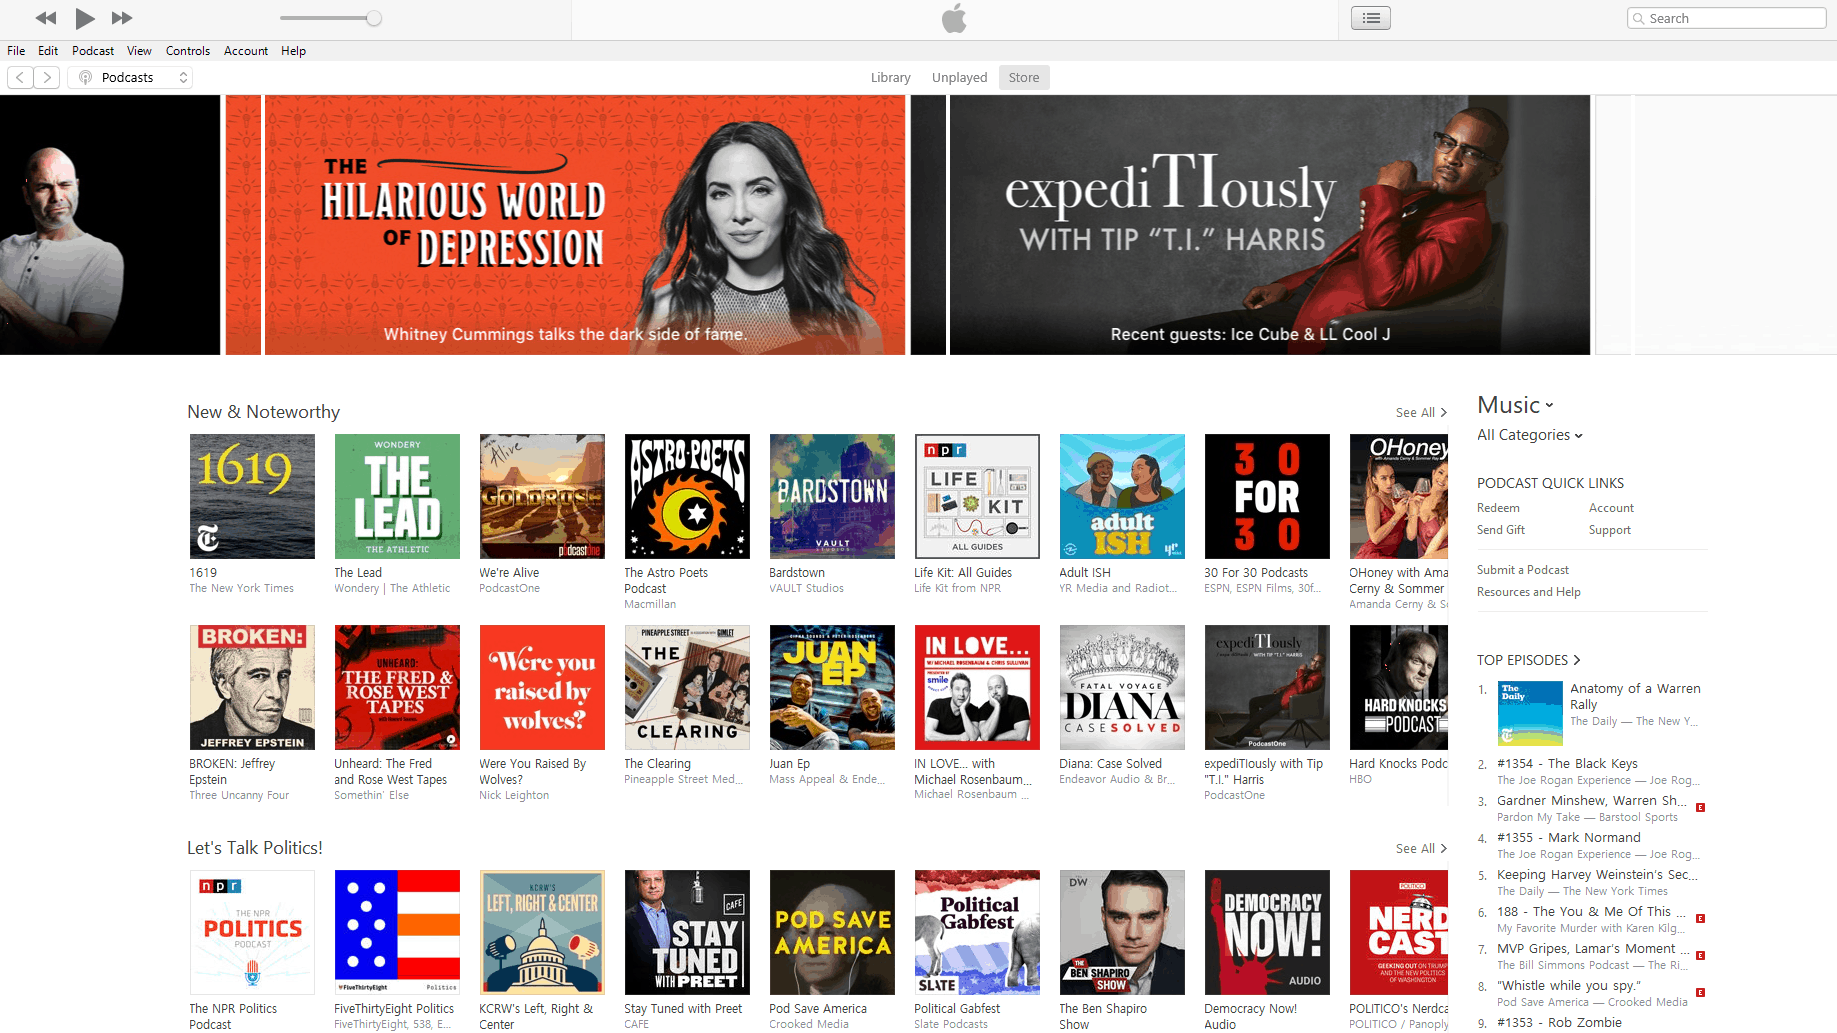 https://castos.com/wp-content/uploads/2019/09/cropped-How-to-See-Your-Podcast-Rankings-in-iTunes.png